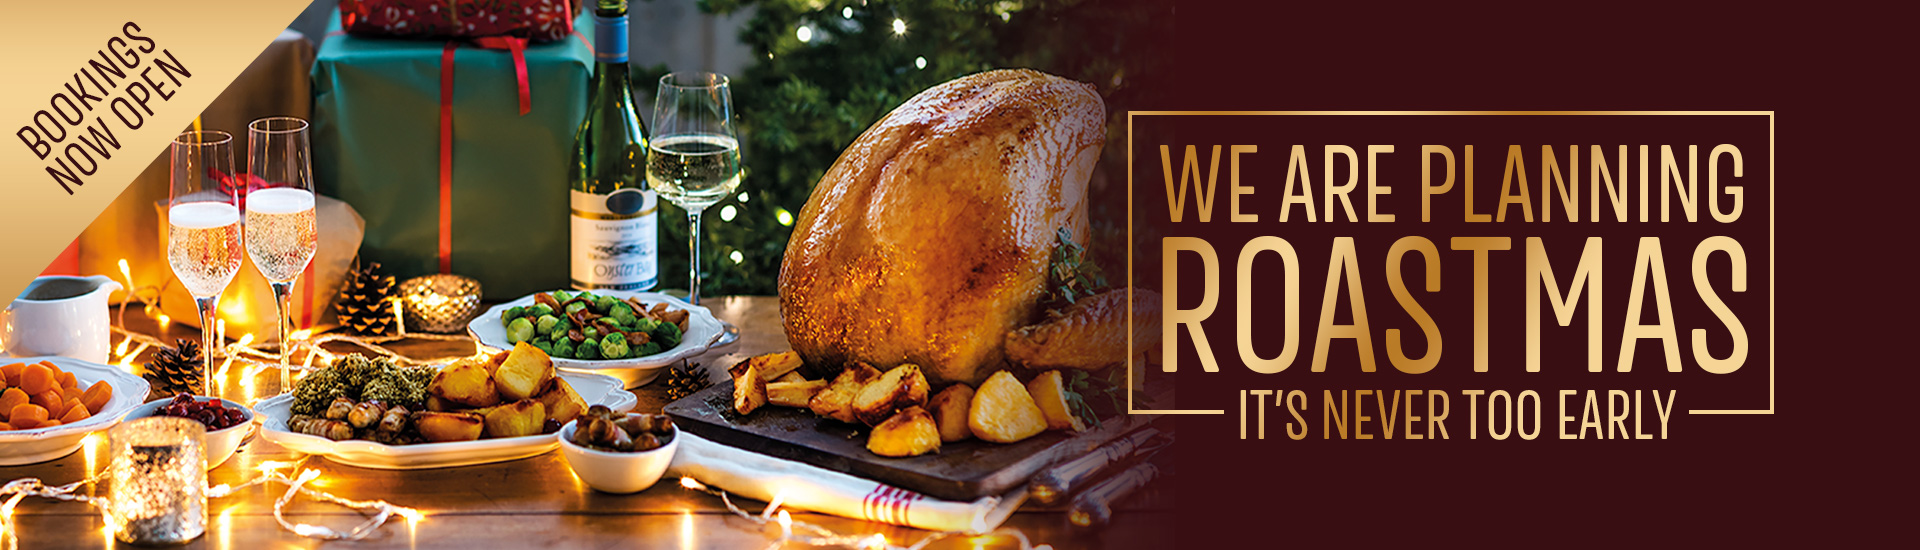 Christmas 2022 at your local Toby Carvery Aigburth | Home of the Roast